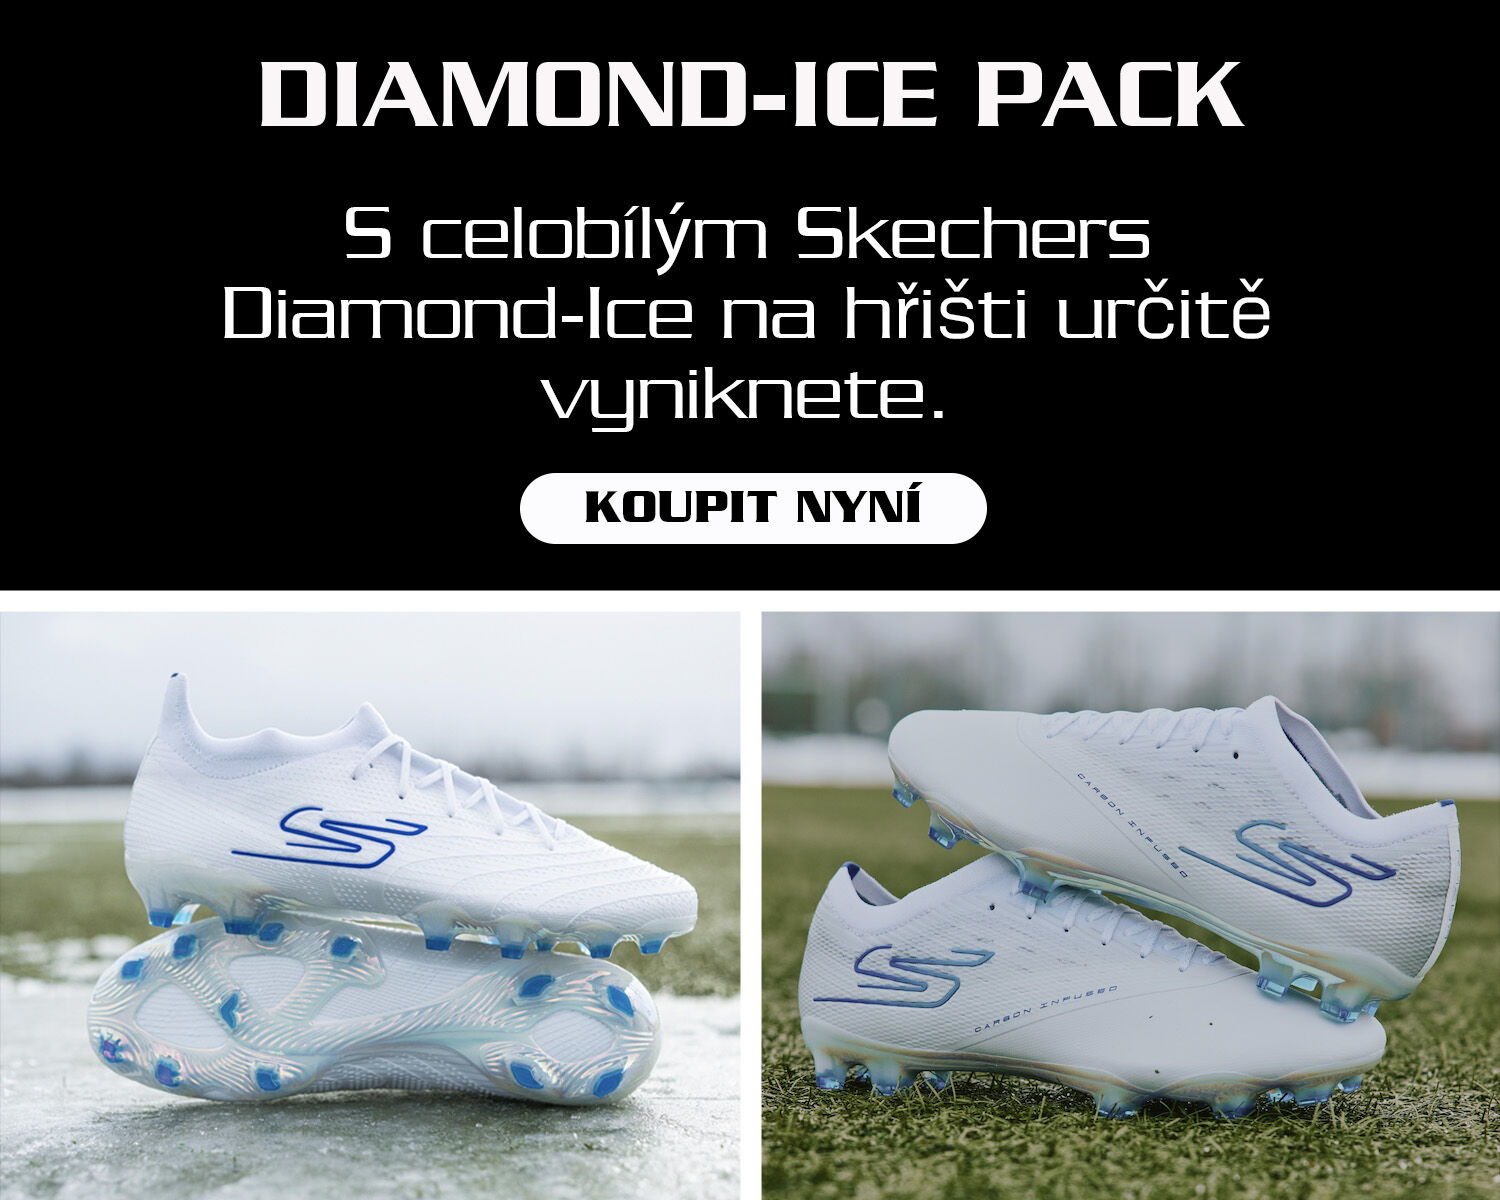 DIAMOND-ICE PACK. The clean, all white Diamond-Ice pack, make you stand out on the pitch in Skechers